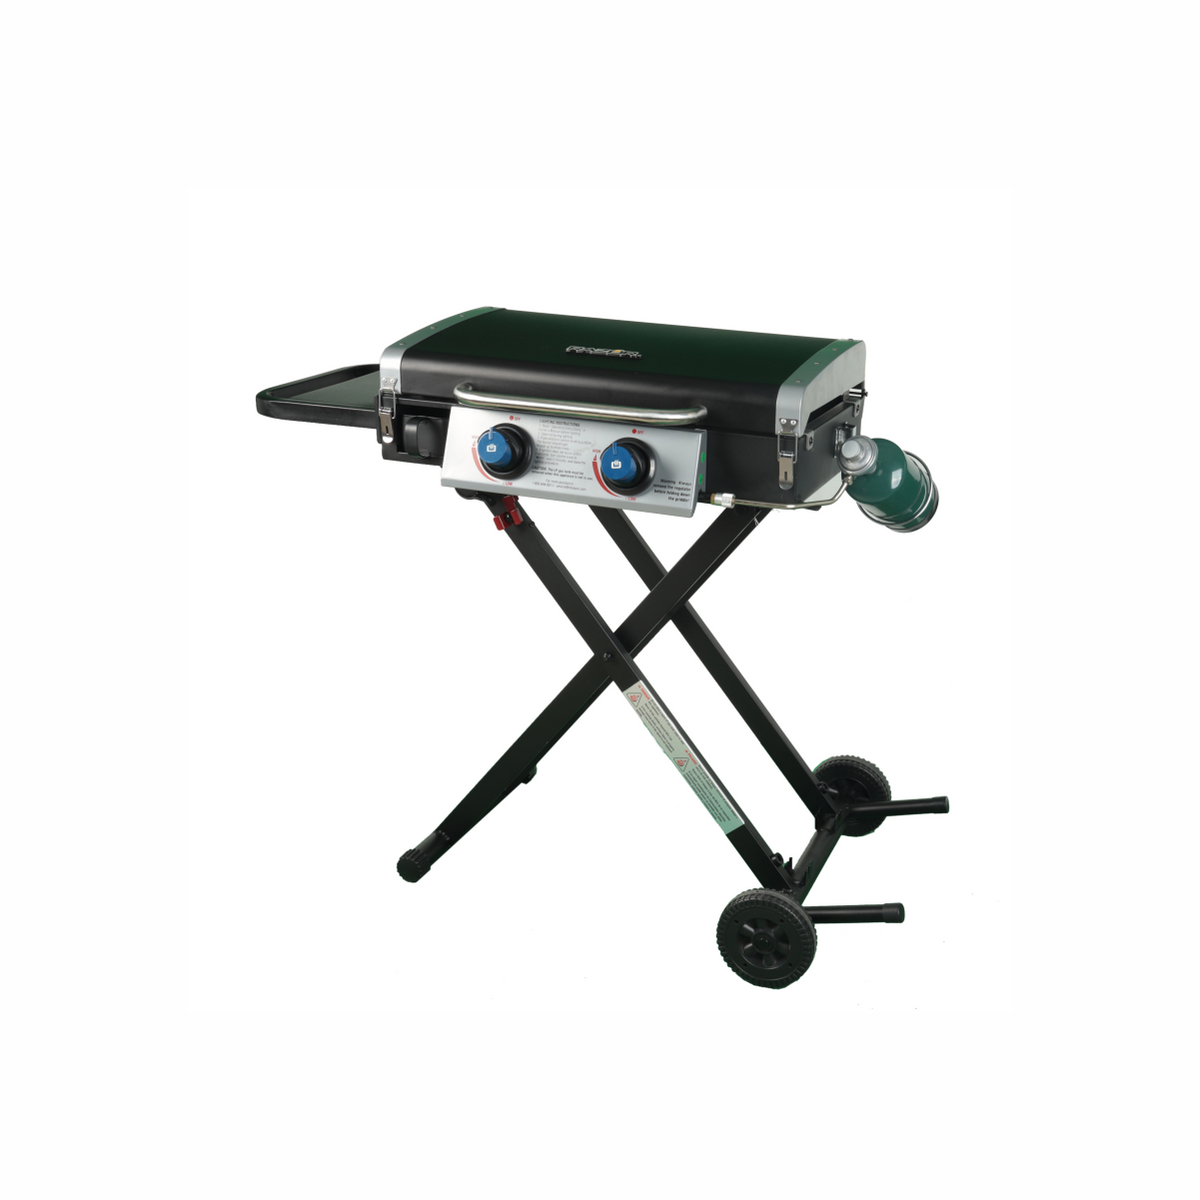 25 in. 3-Burner Portable Propane Gas Griddle with Lid in Black